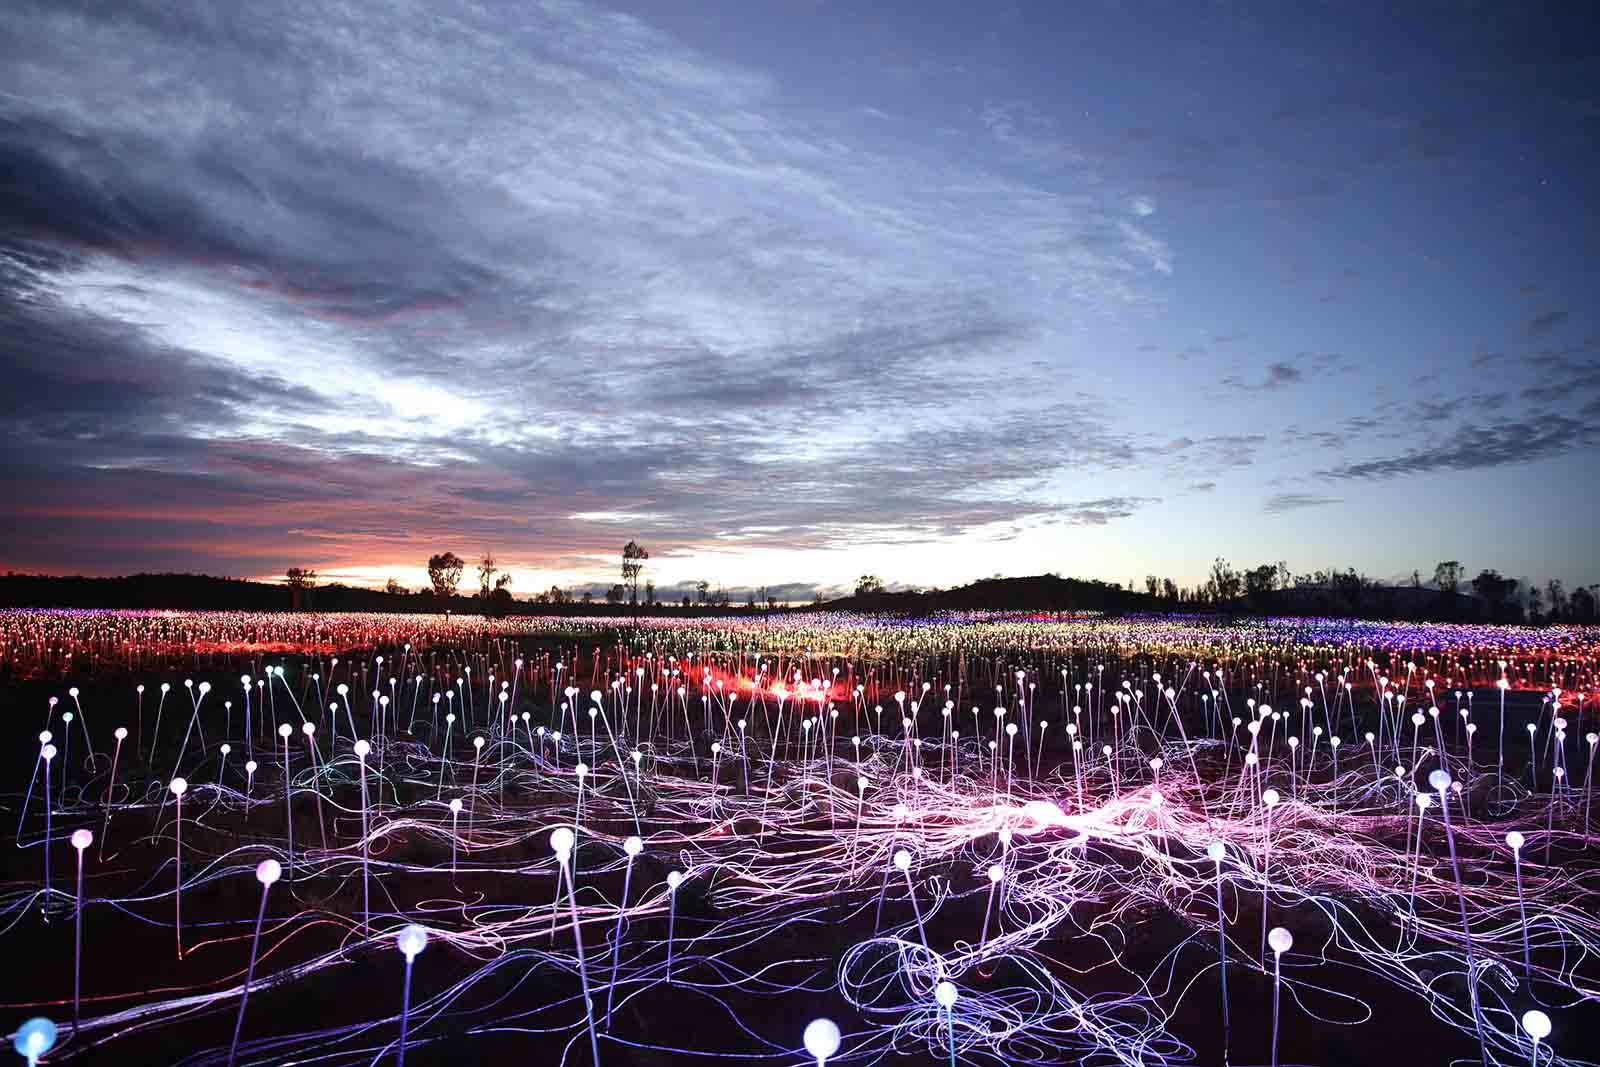 Bruce Munro's Field of Light installation | See Australia's Red Centre in a new light